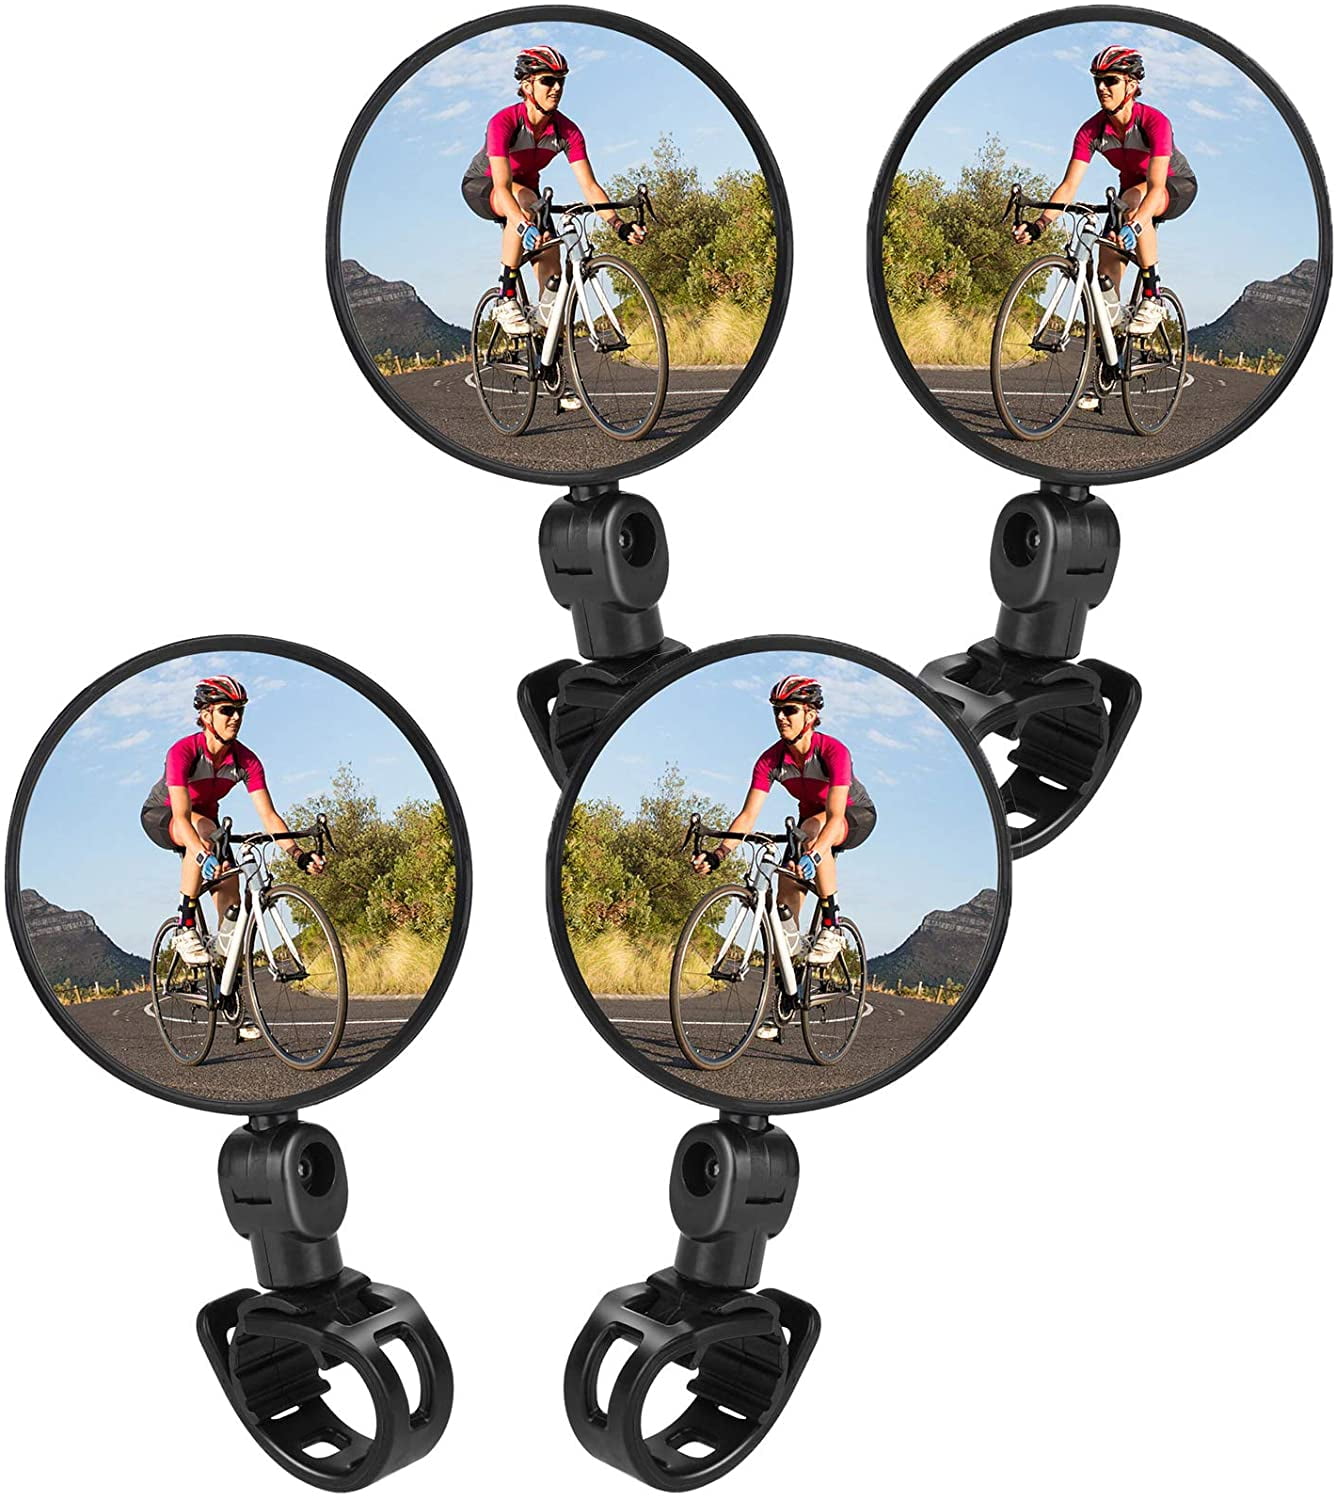 Bicycle Mirrors Cycling Mountain Bike Rear Mirror View For Handlebar Rearview 